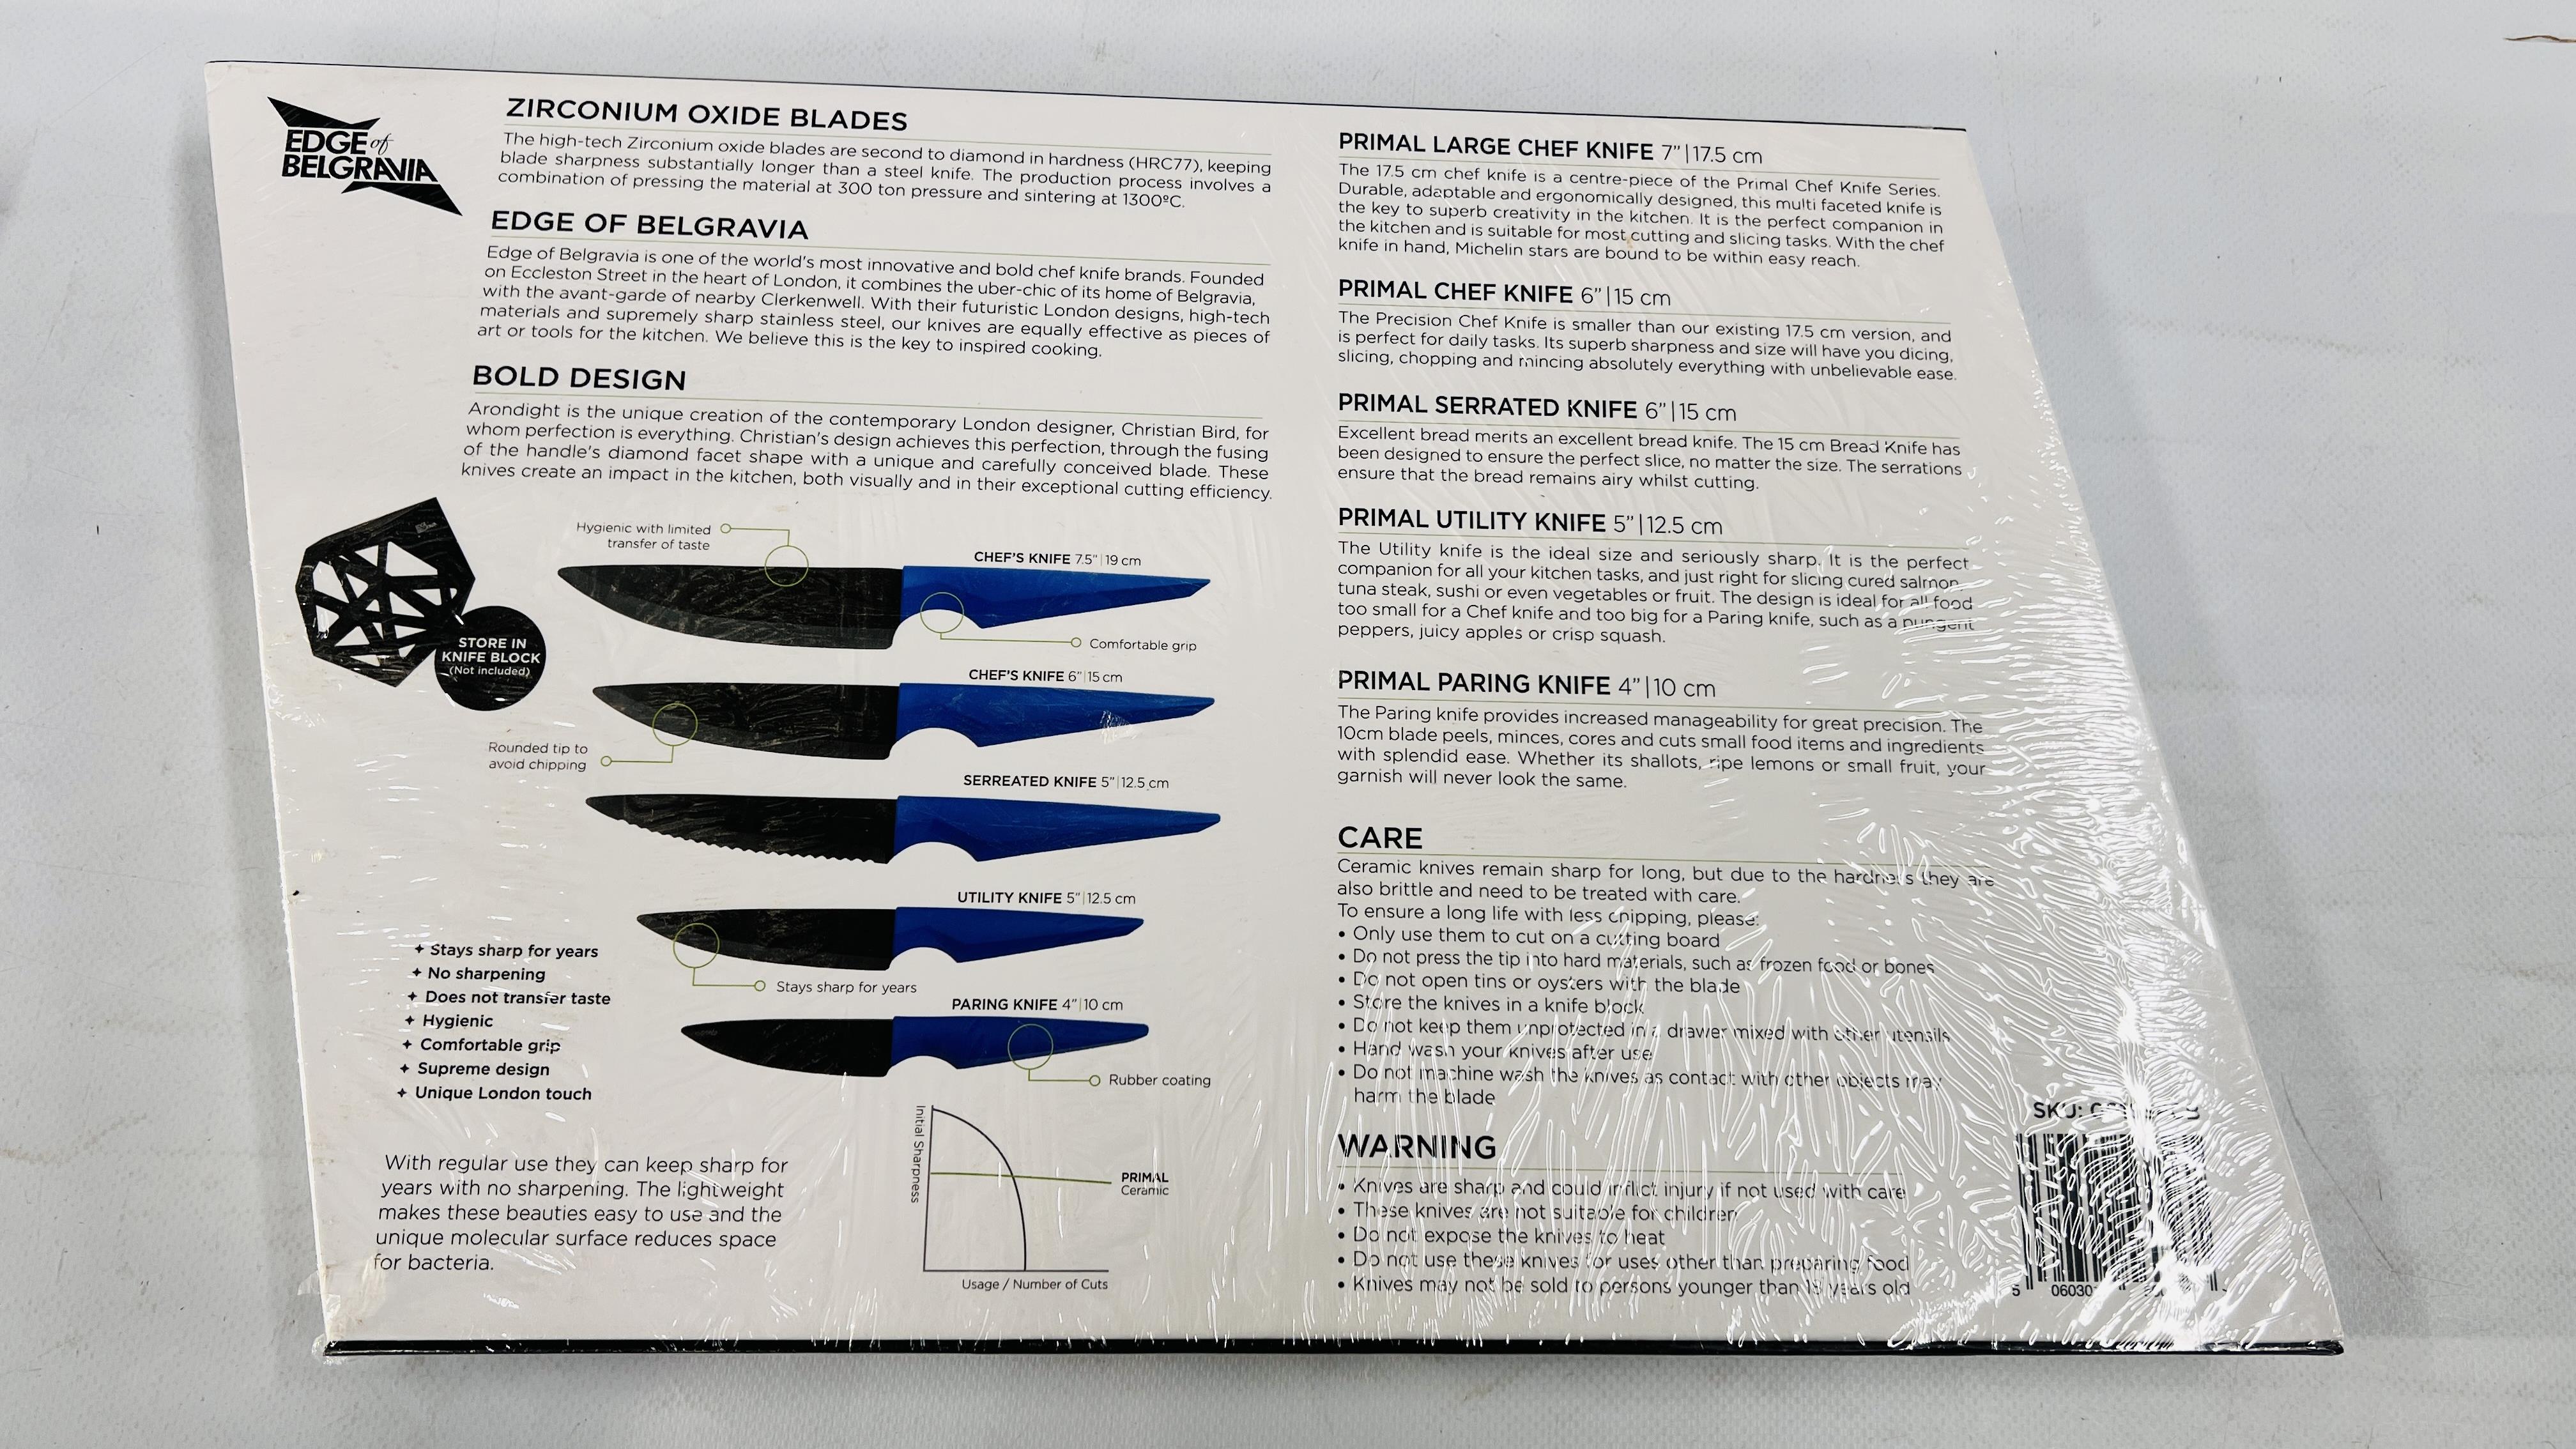 AS NEW BOXED EDGE OF BELGRAVIA PRIMAL ELECTRIC BLUE CERAMIC CHEF KNIFE SERIES COMPLETE FIVE PIECE - Image 2 of 2